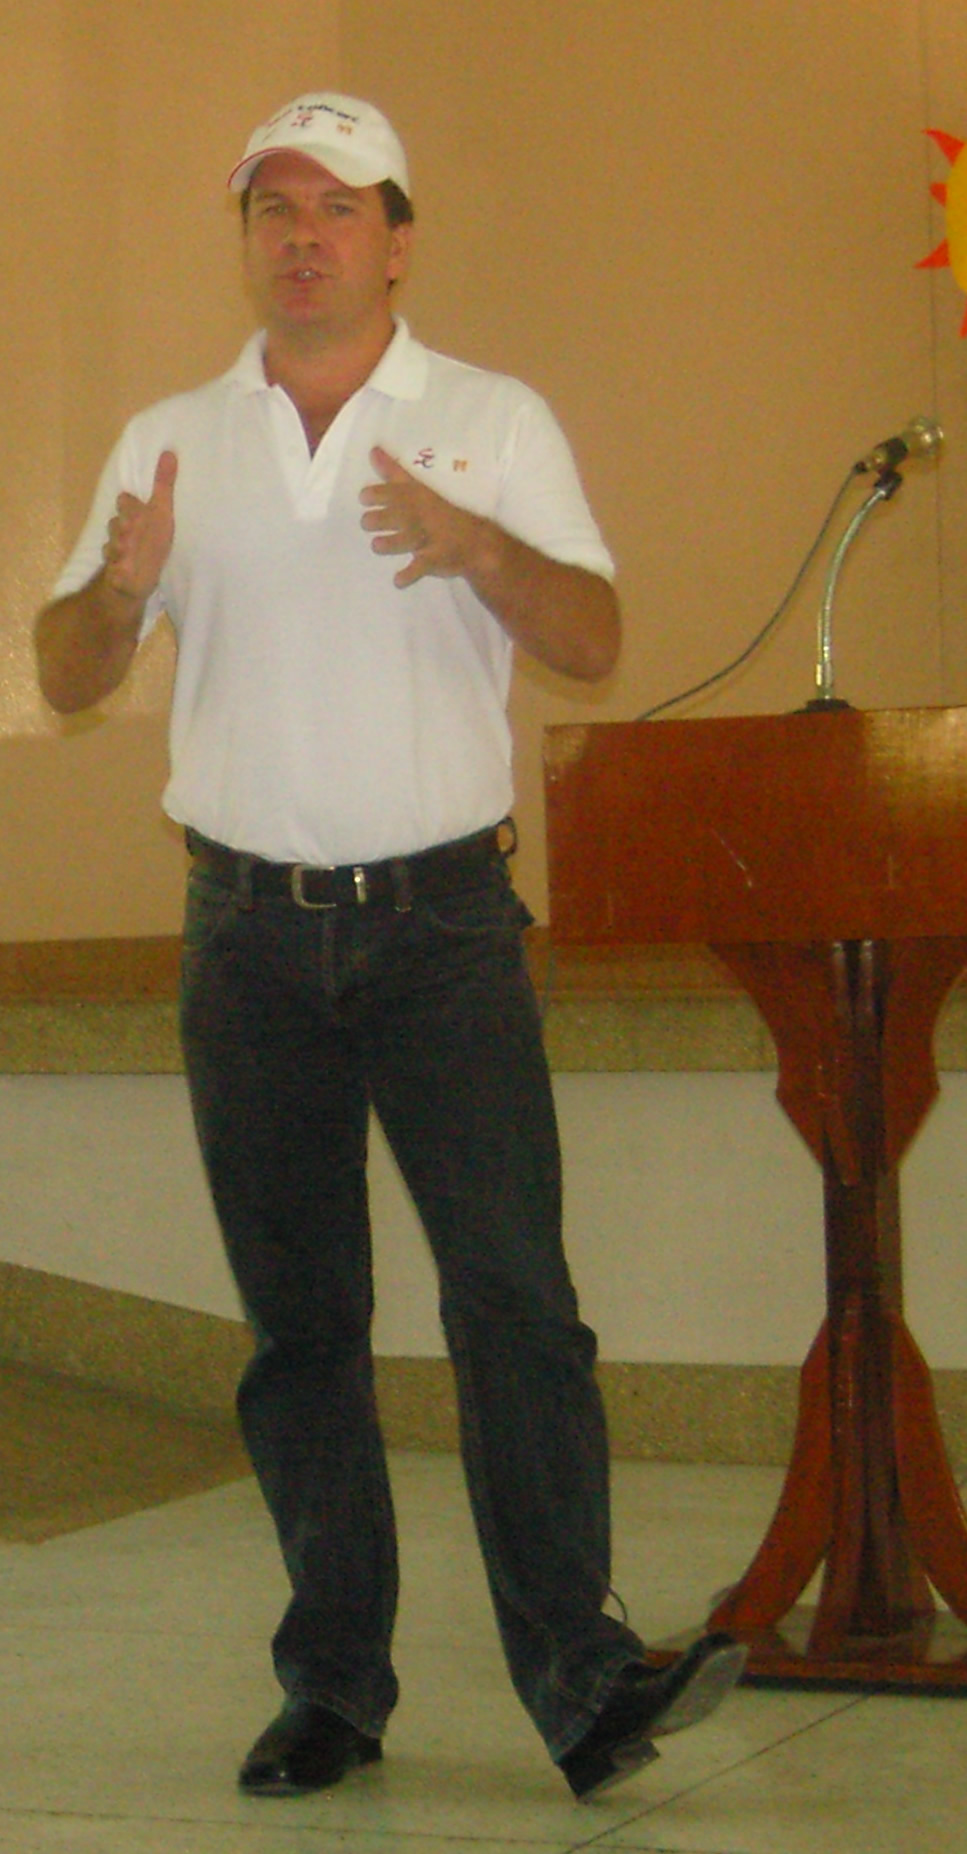 James With - Lectures to drama students at Chiang Mai International School. May 2007.